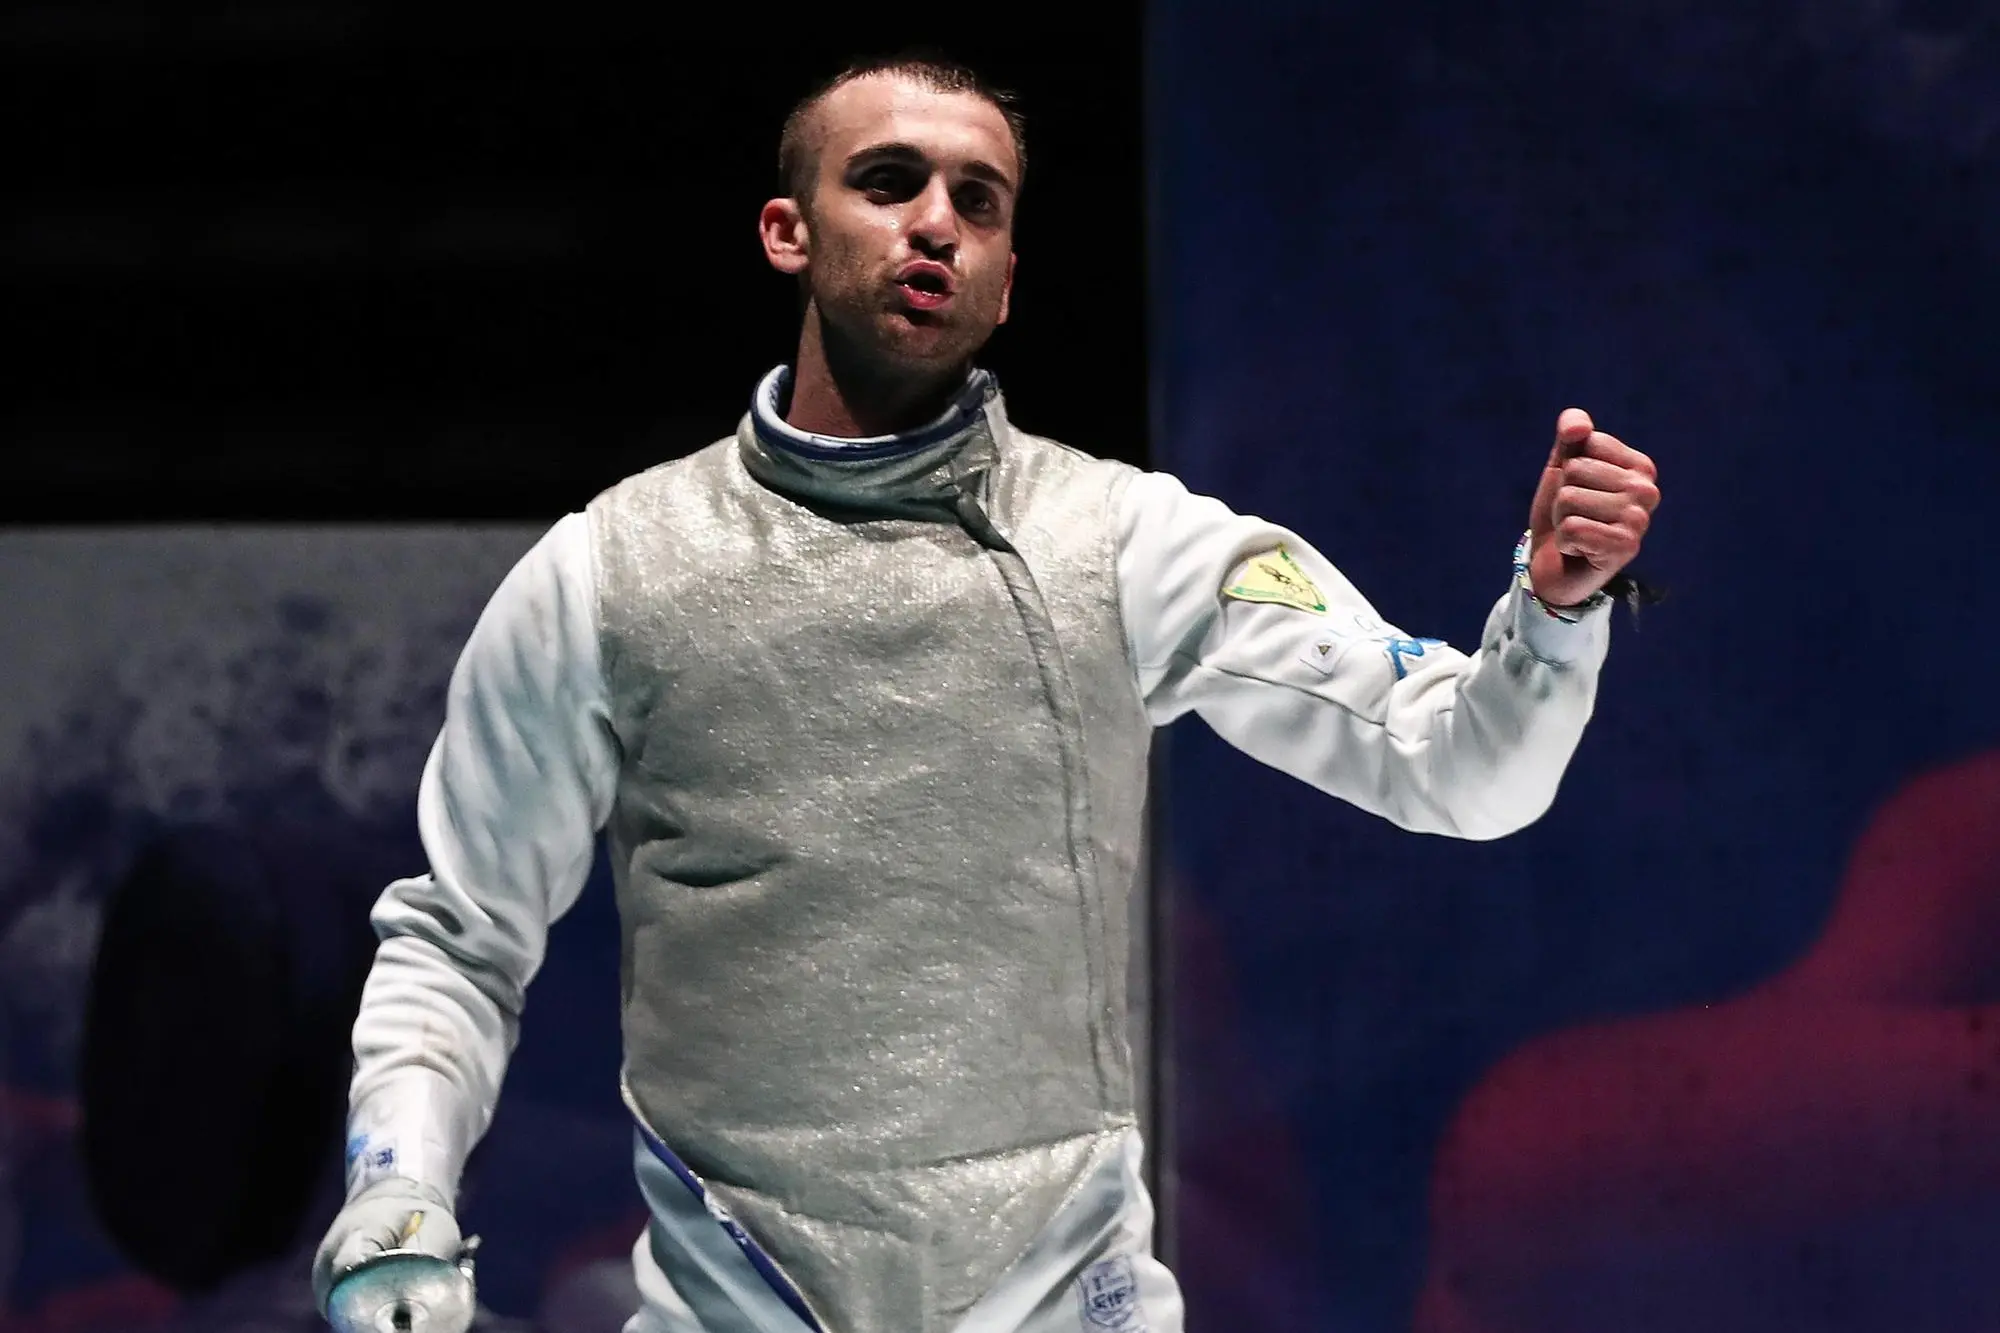 epa10020868 Daniele Garozzo of Italy celebrate following his final match with Tommaso Marini of Italy during the Men's foil competition of the European Fencing Championship, in Antalya, Turkey, 18 June 2022. EPA/ERDEM SAHIN